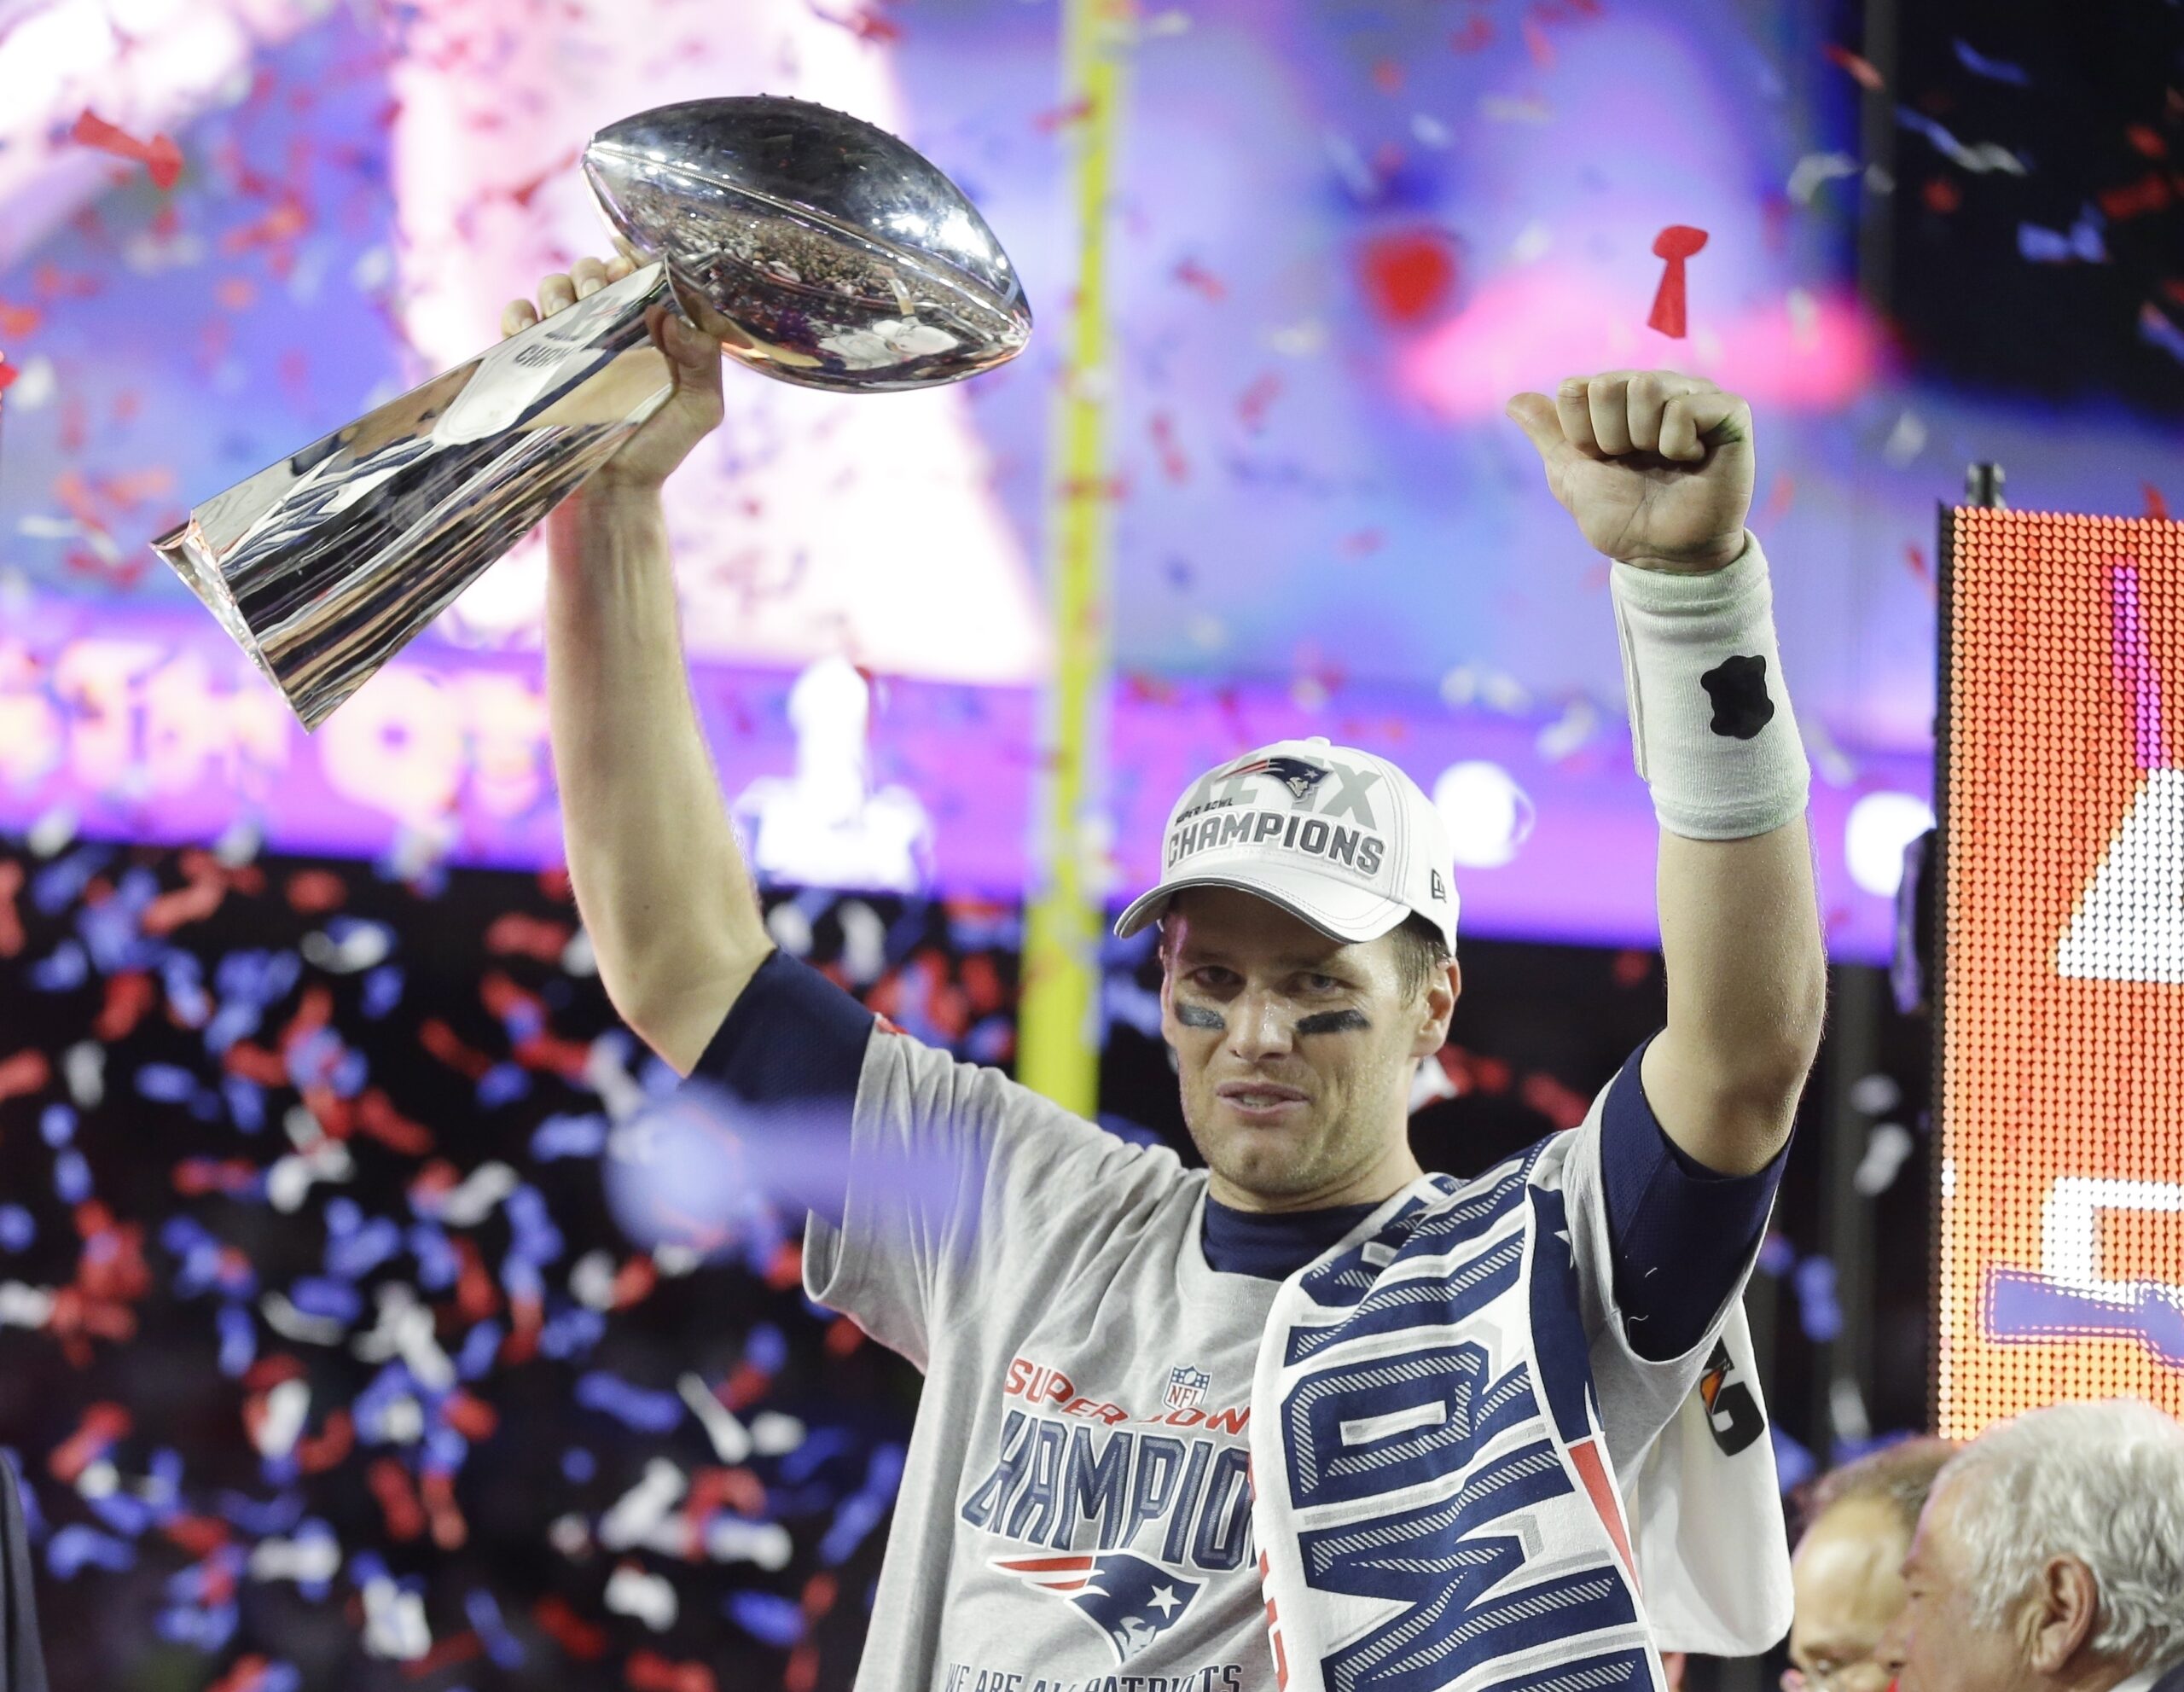 Tom Brady Thanks Patriots for Statement on Retirement: ‘Love You All’